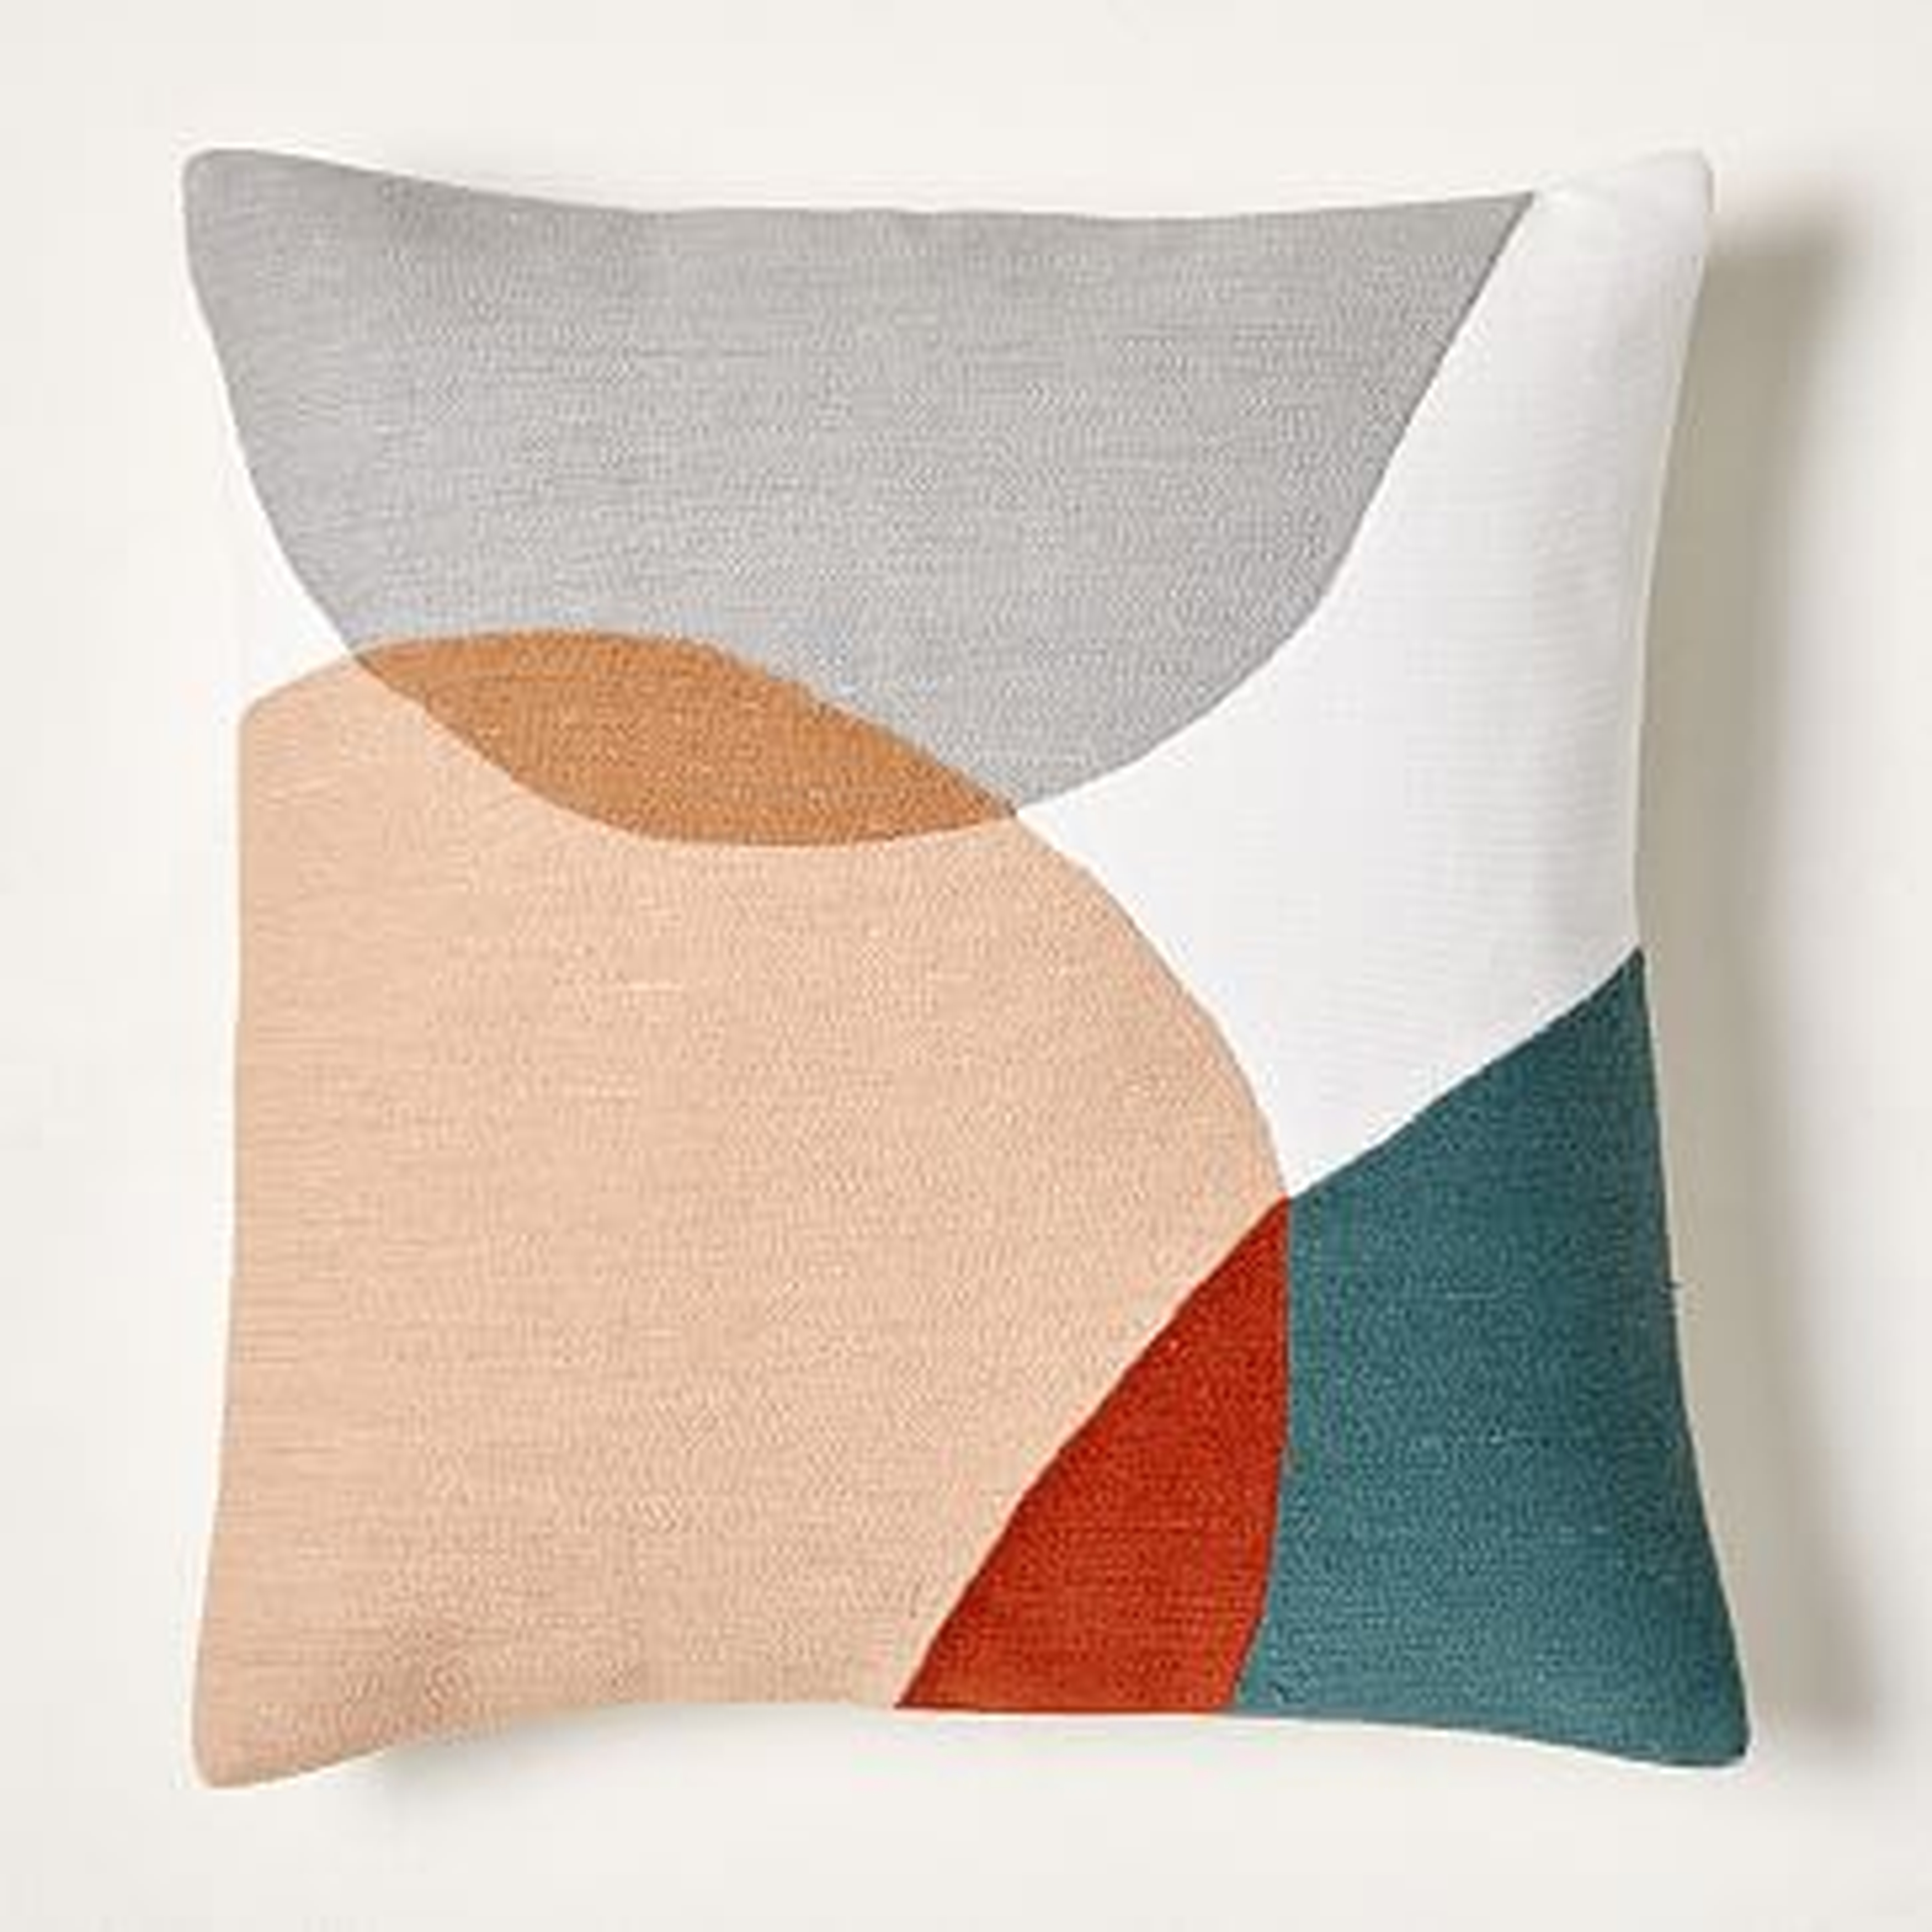 Corded Overlapping Pebbles Pillow Cover, 18"x18", Multi - West Elm